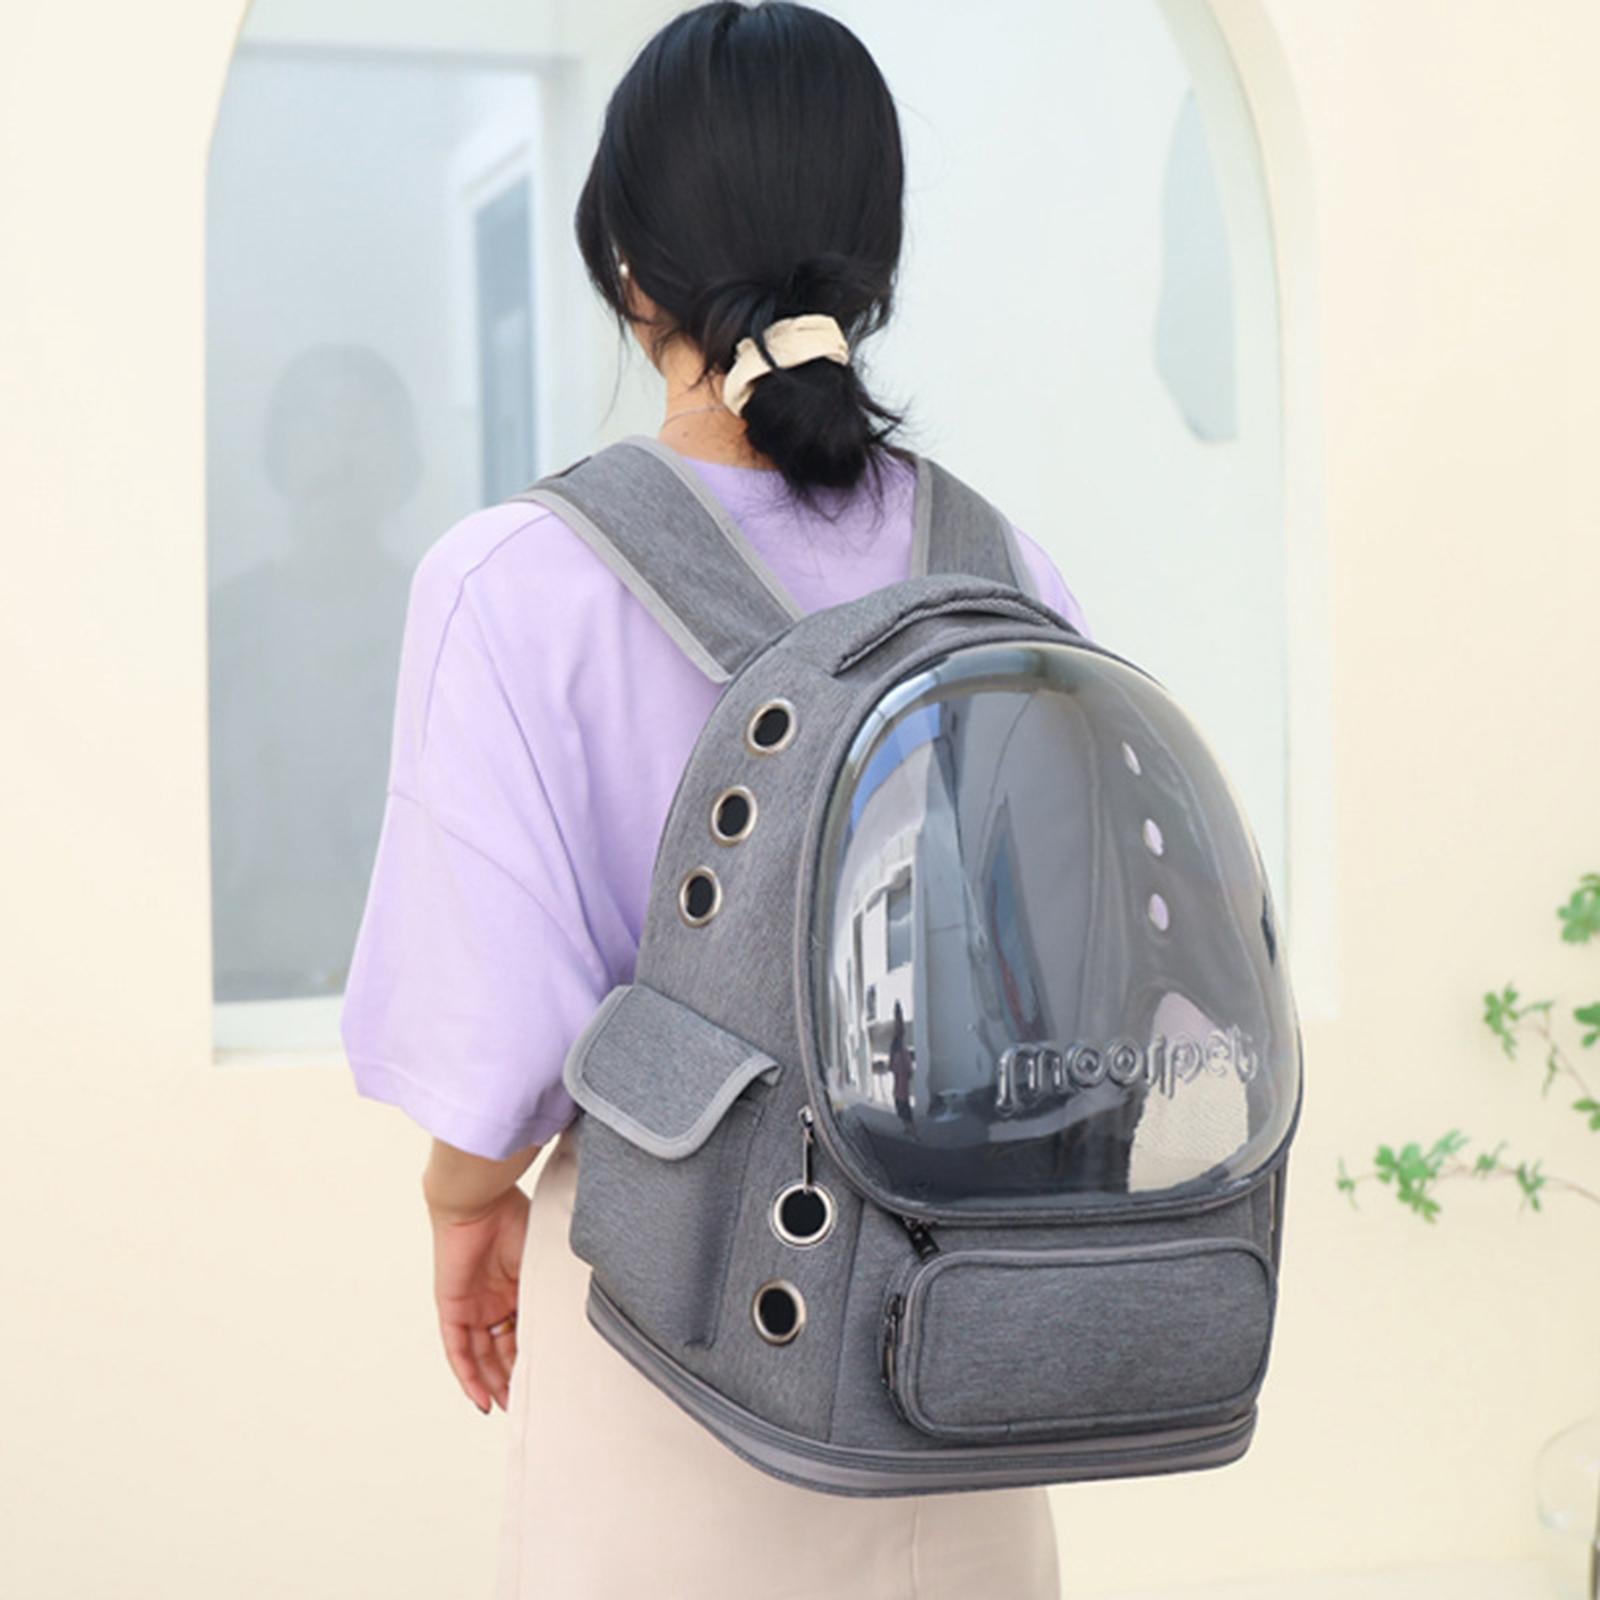 Cat Carrier Backpack Airline Cat and Small Dog Large Ventilated Portable Carrying Bag Pet Backpack for Travel Outdoor Hiking Use Grey